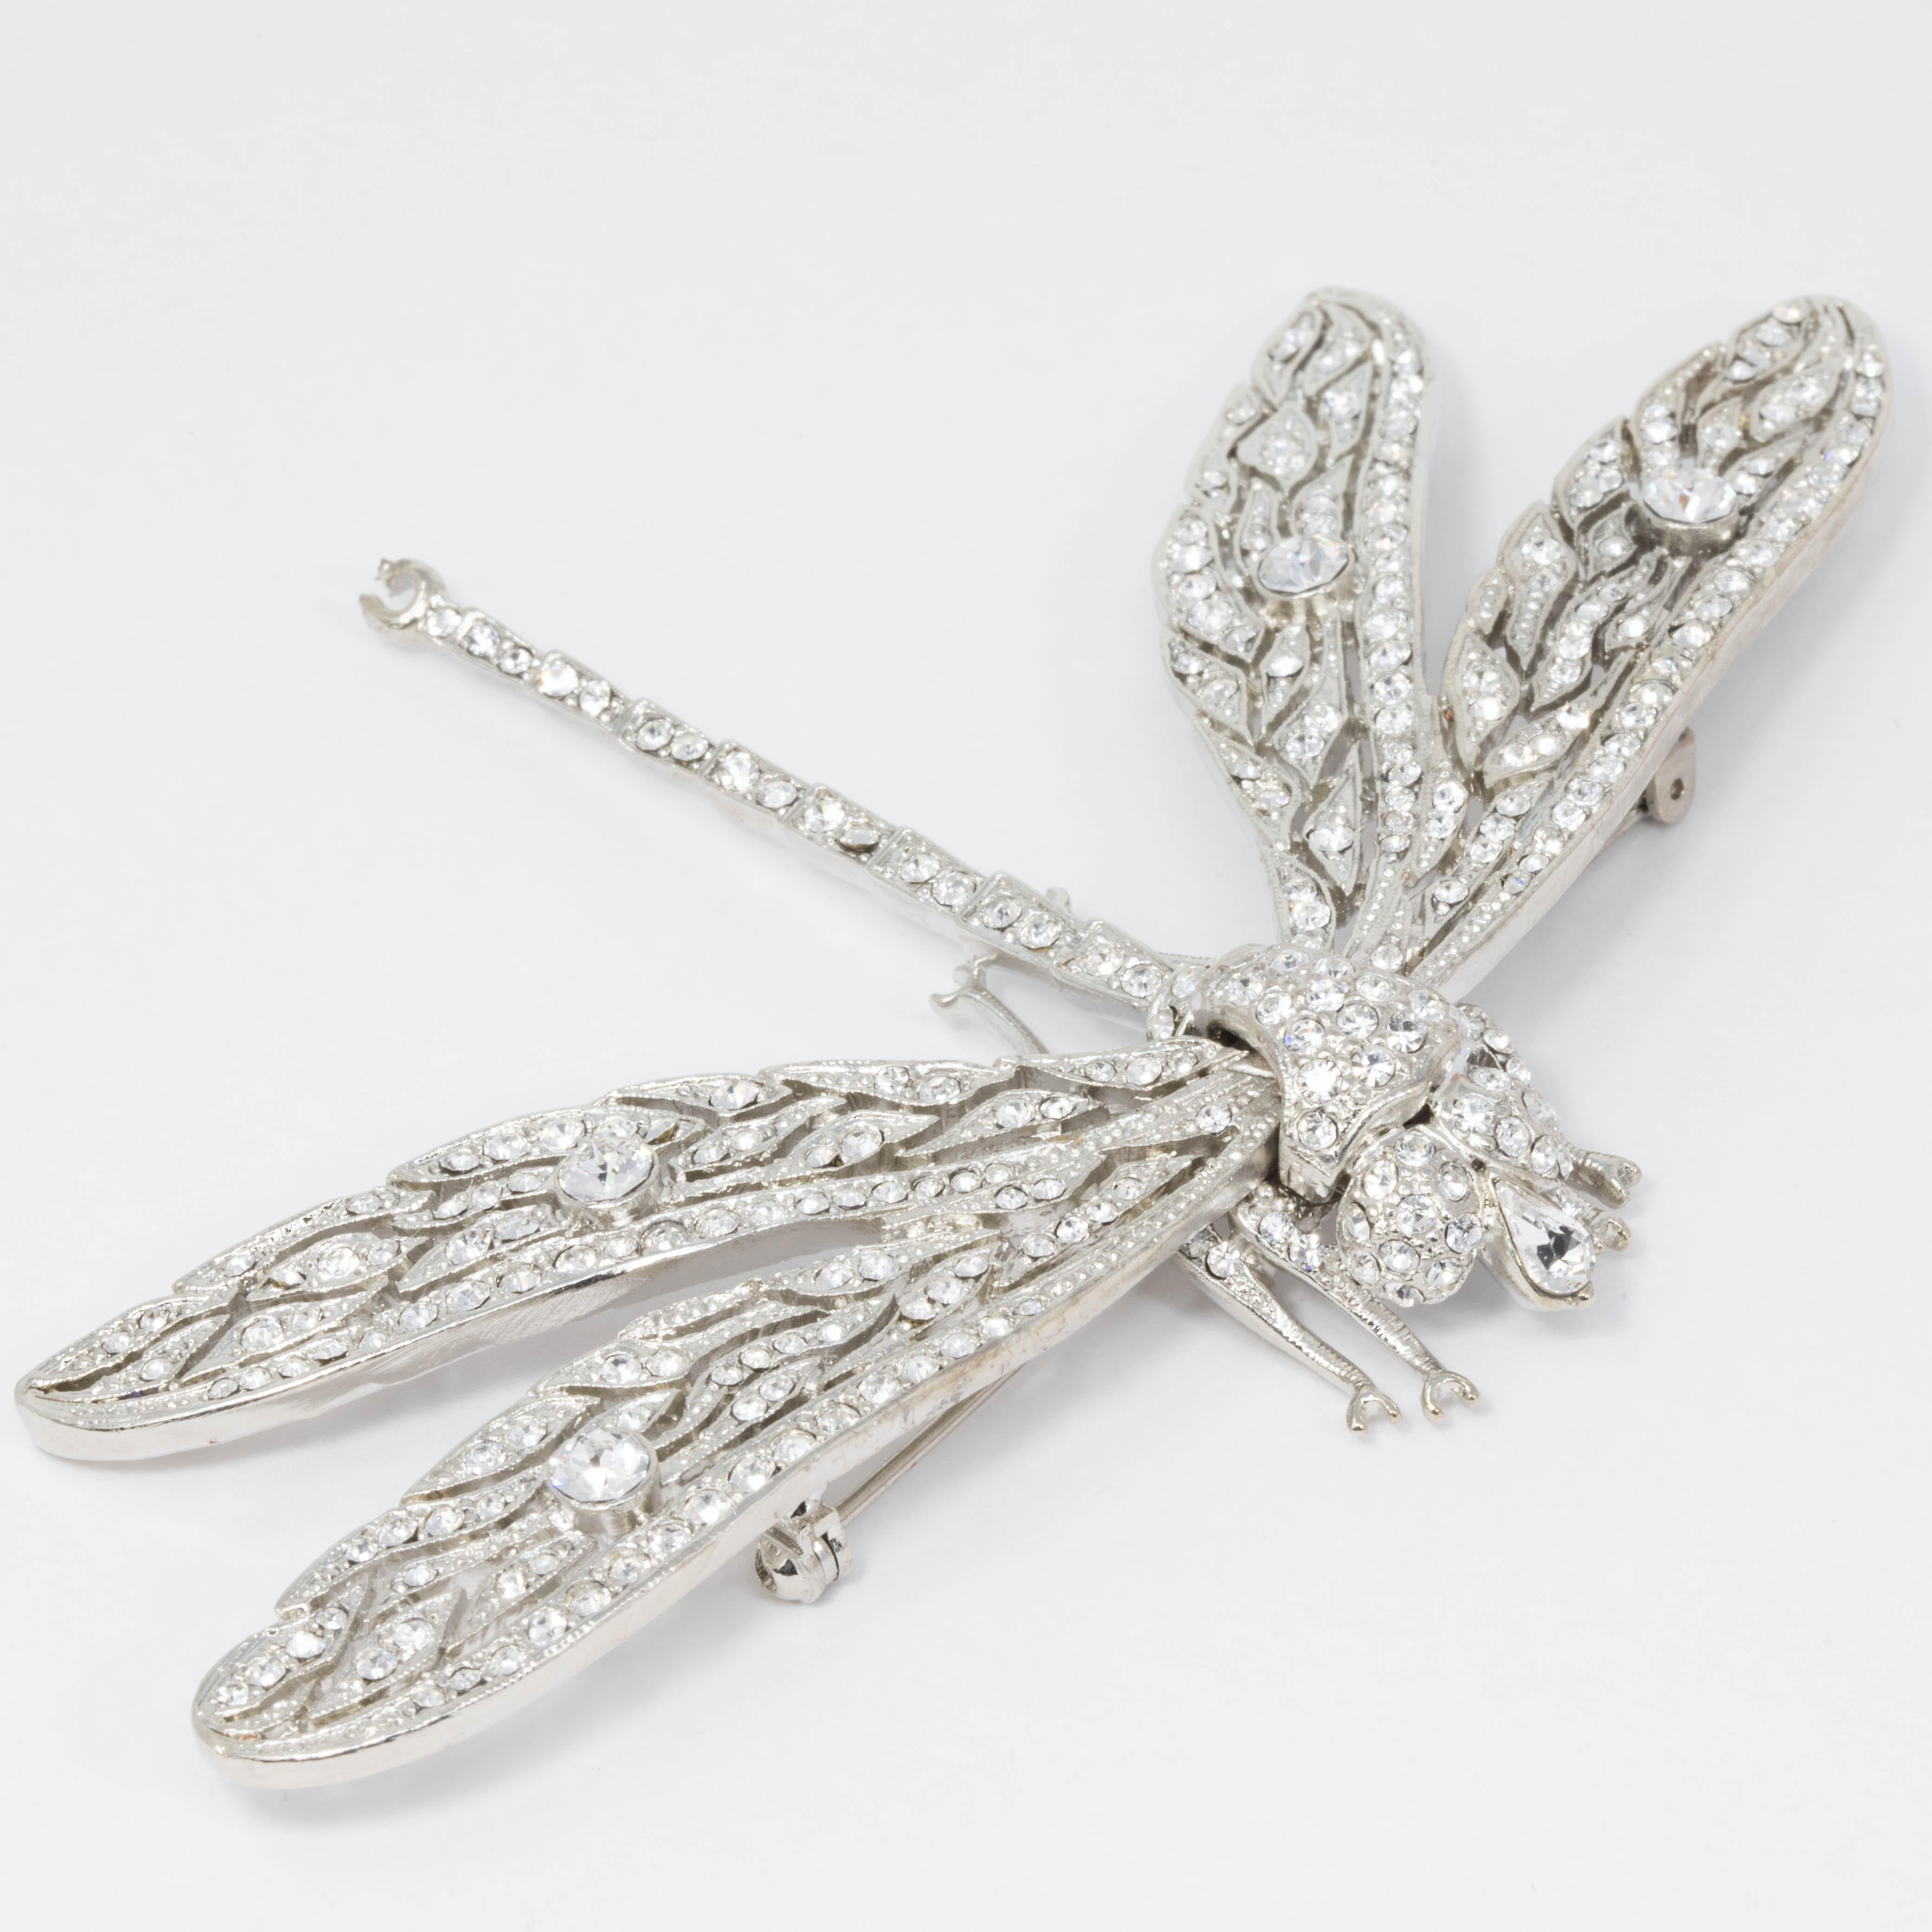 A glamorous silver dragonfly pin, decorated with sparkling clear crystals. Brooch by Kenneth Jay Lane.

Silver-tone.

Tags, Marks, Hallmarks: Kenneth © Lane